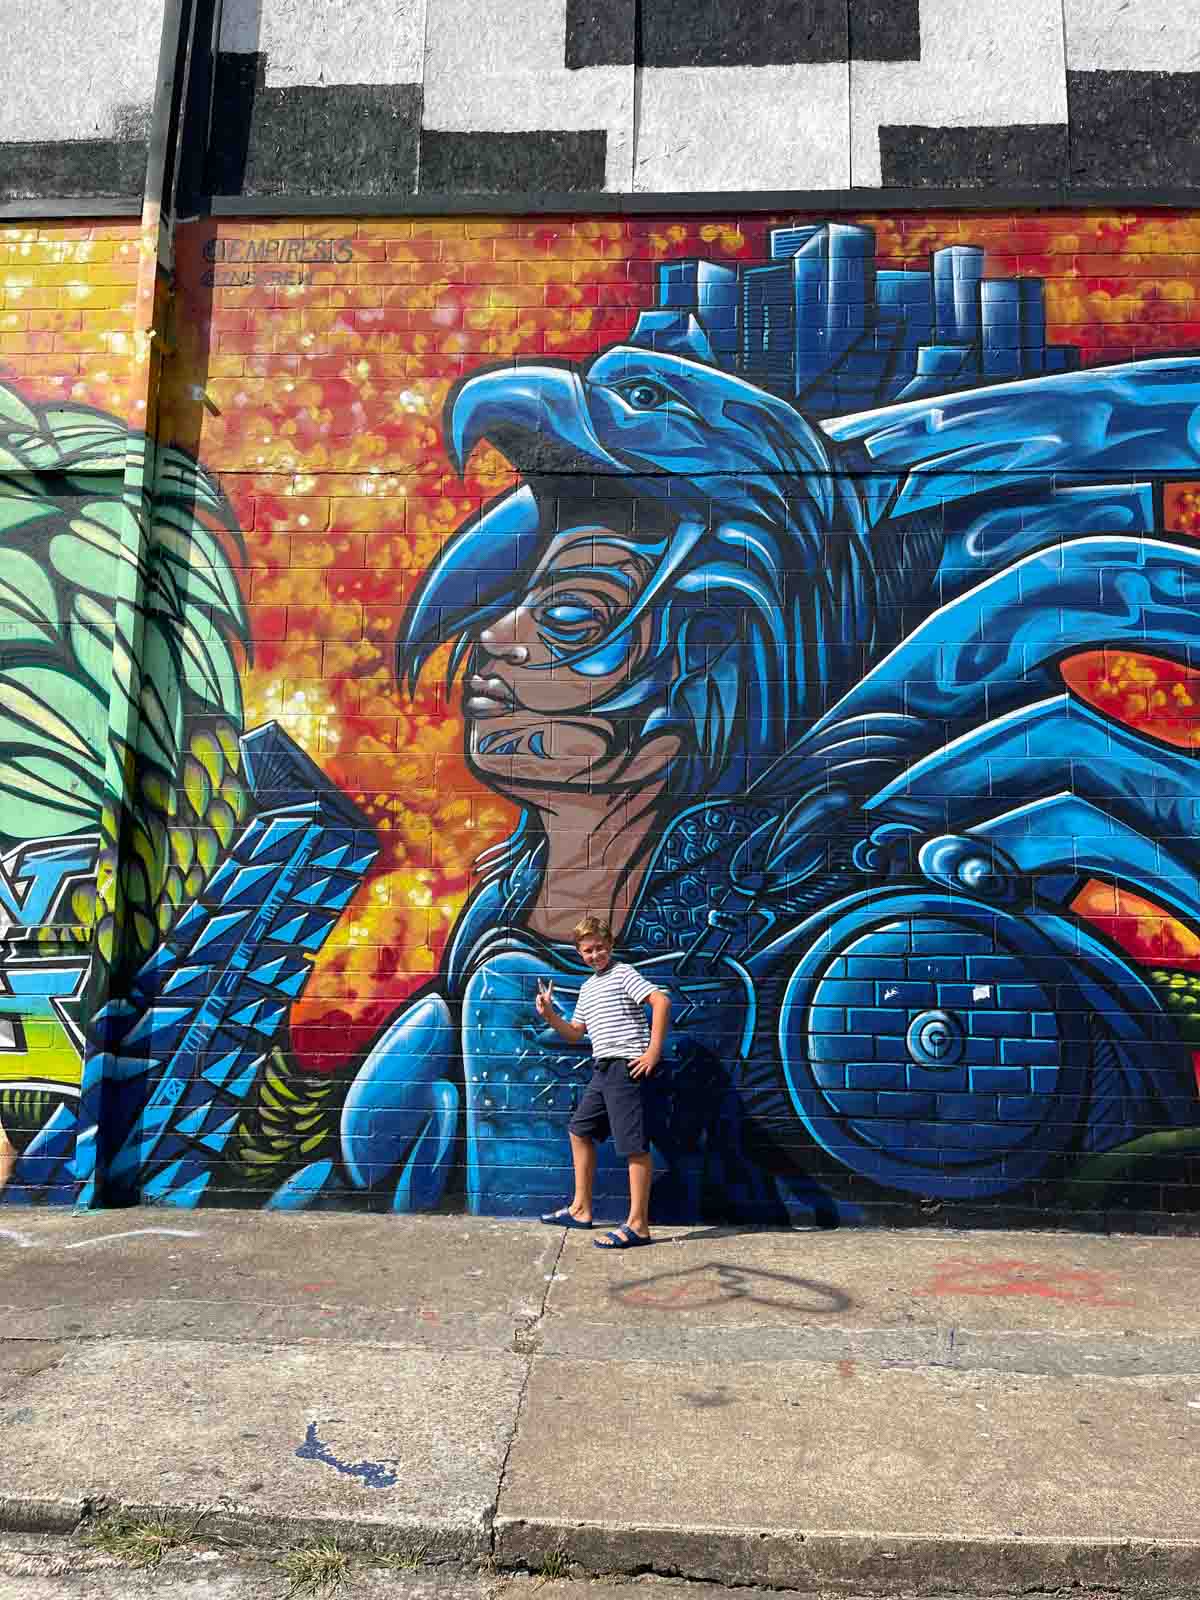 Houston graffiti wall with boy standing in front.